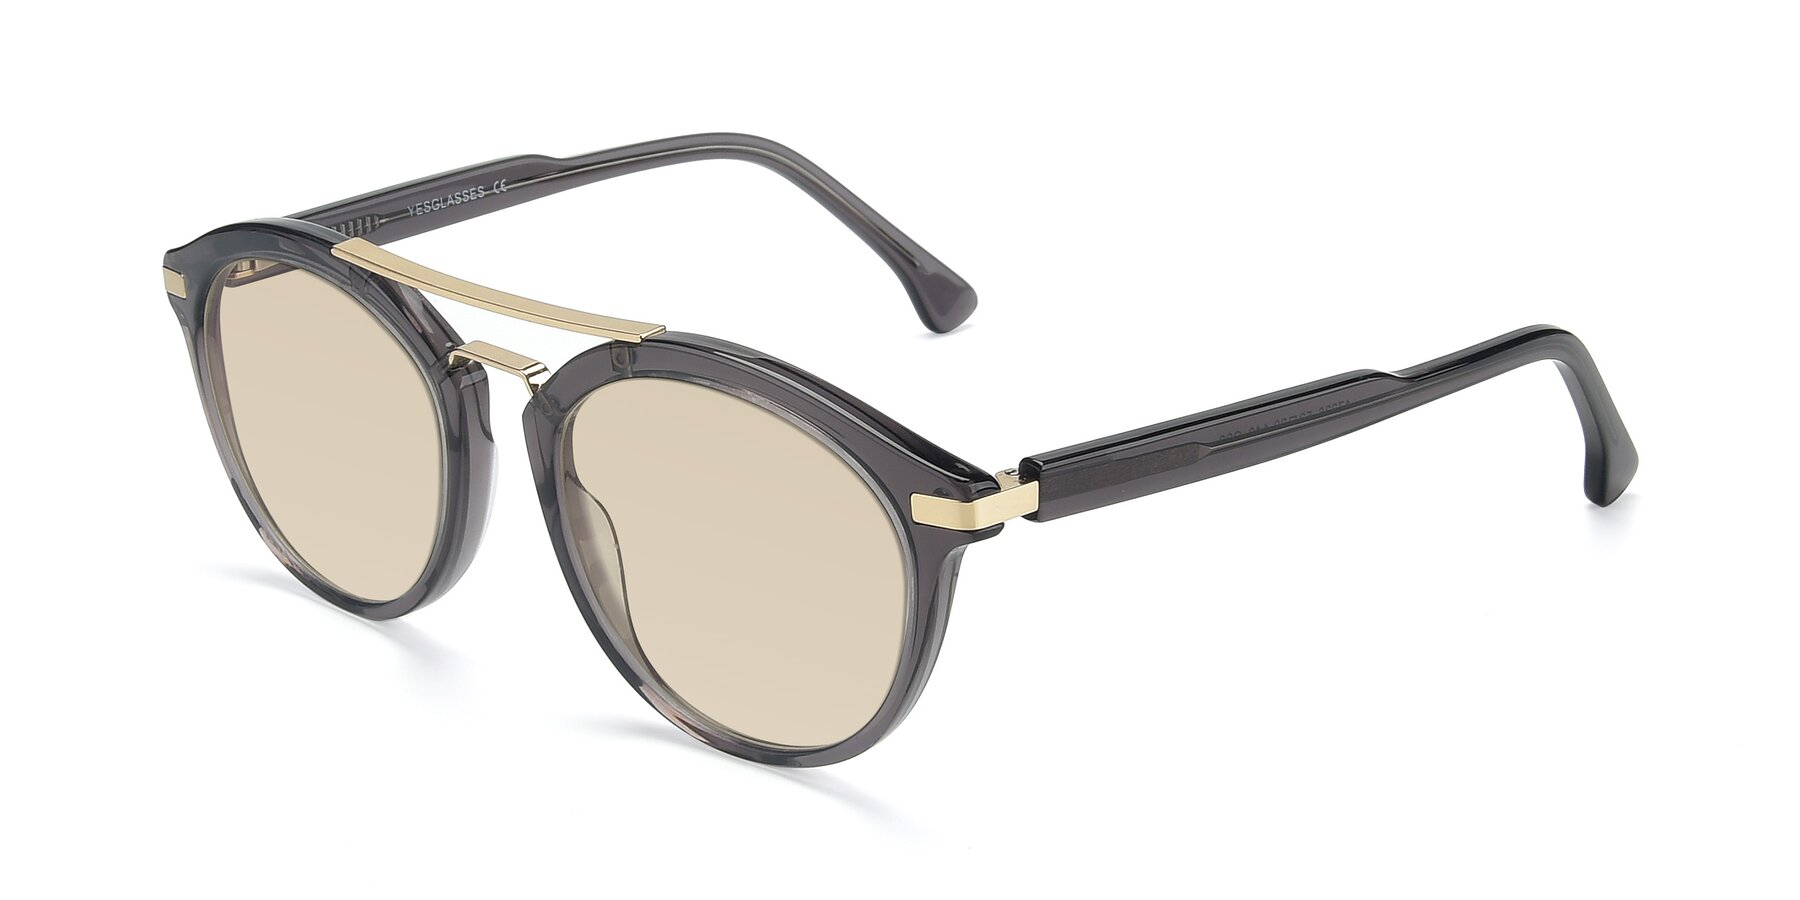 Angle of 17236 in Gray-Gold with Light Brown Tinted Lenses